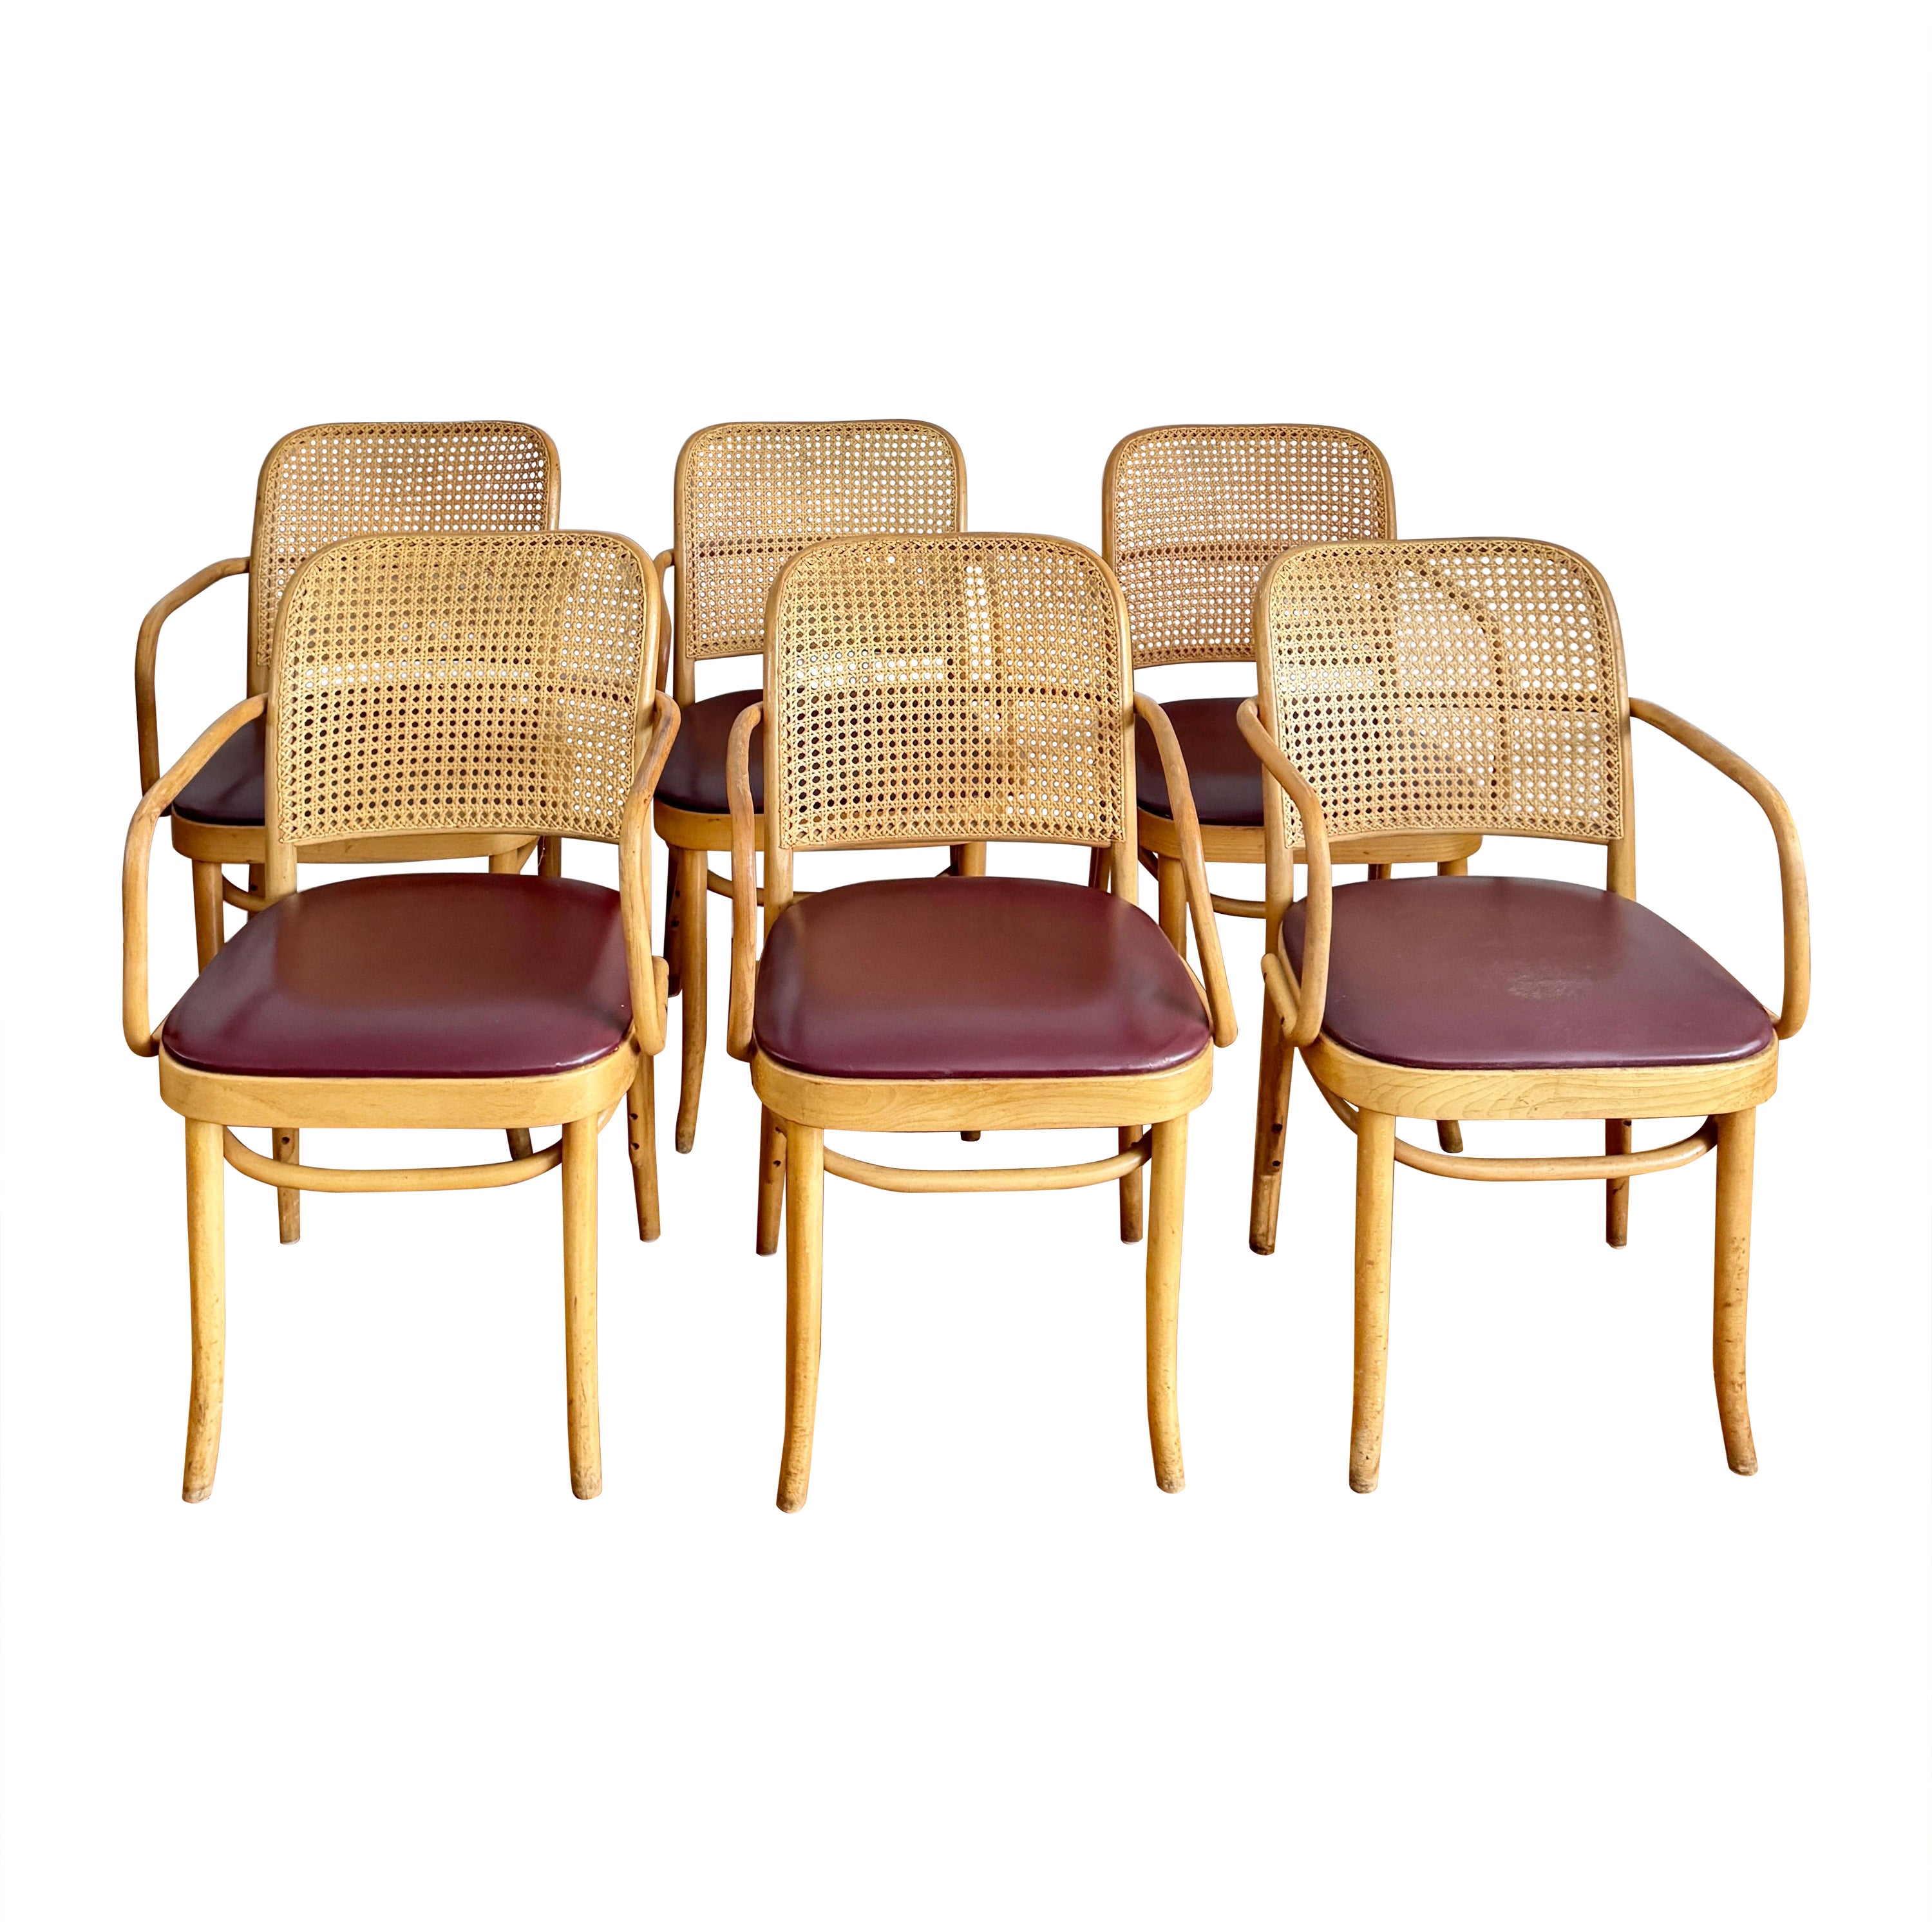 Mid Century Thonet Style Bentwood Chairs Chairs - Set of 6